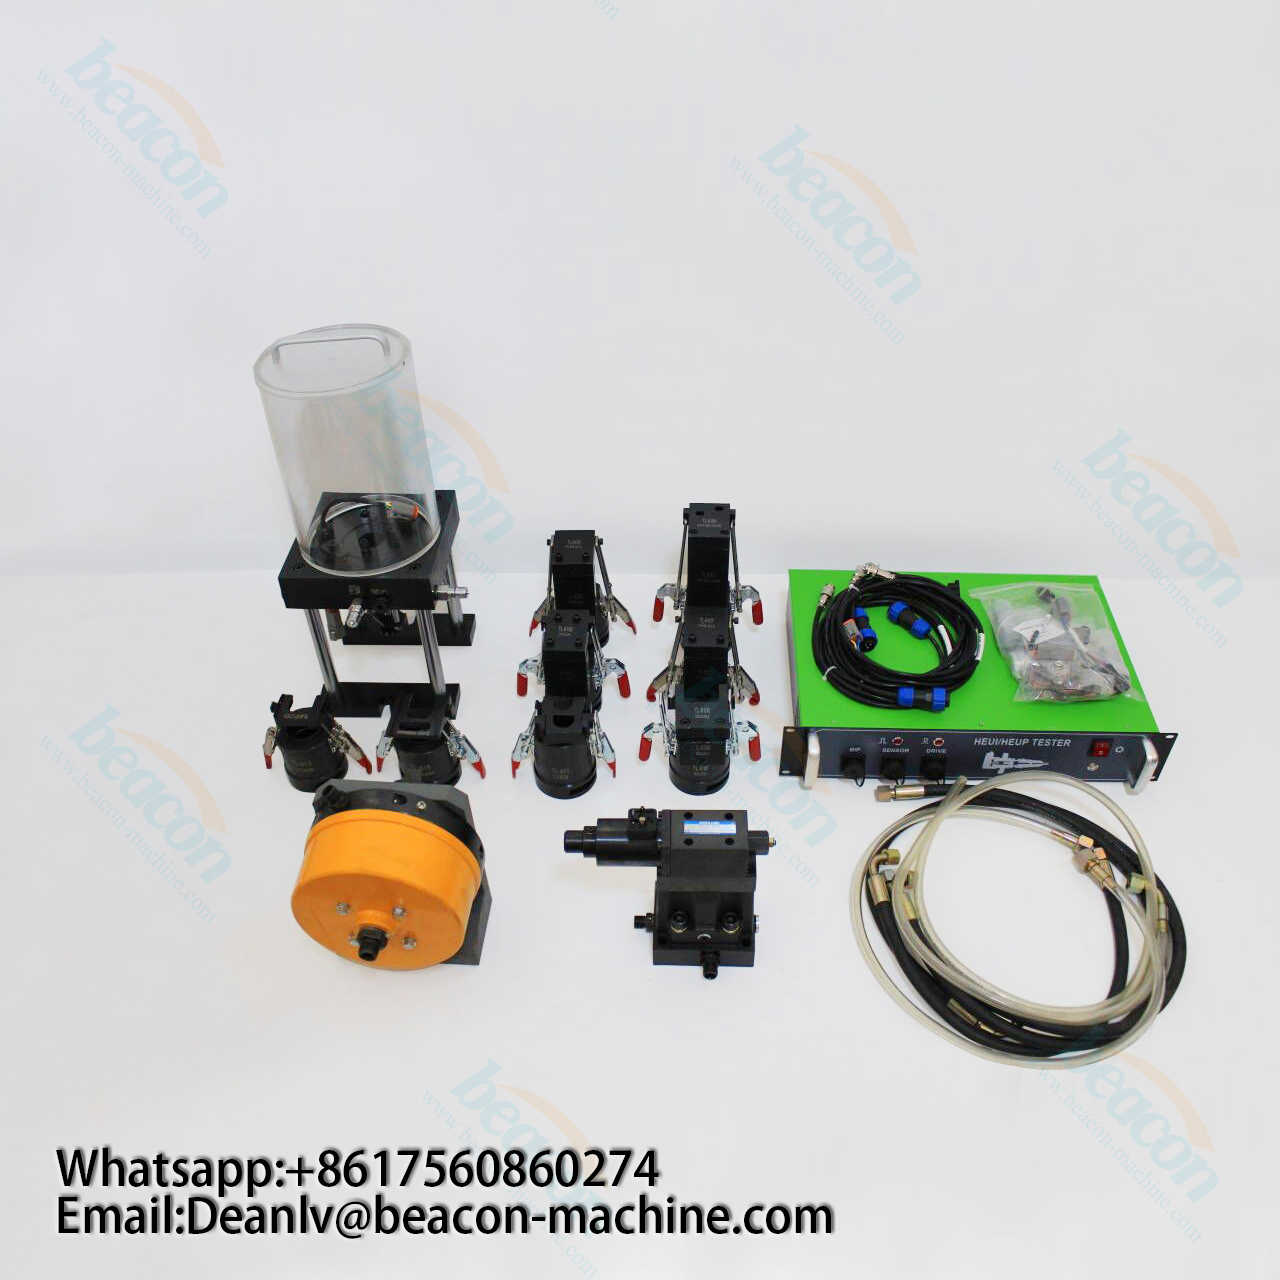 BEACON DIESEL Common Rail Injector And Pump Tester Machine HEUI HEUP Test Set With Fexture For Diesel Injector